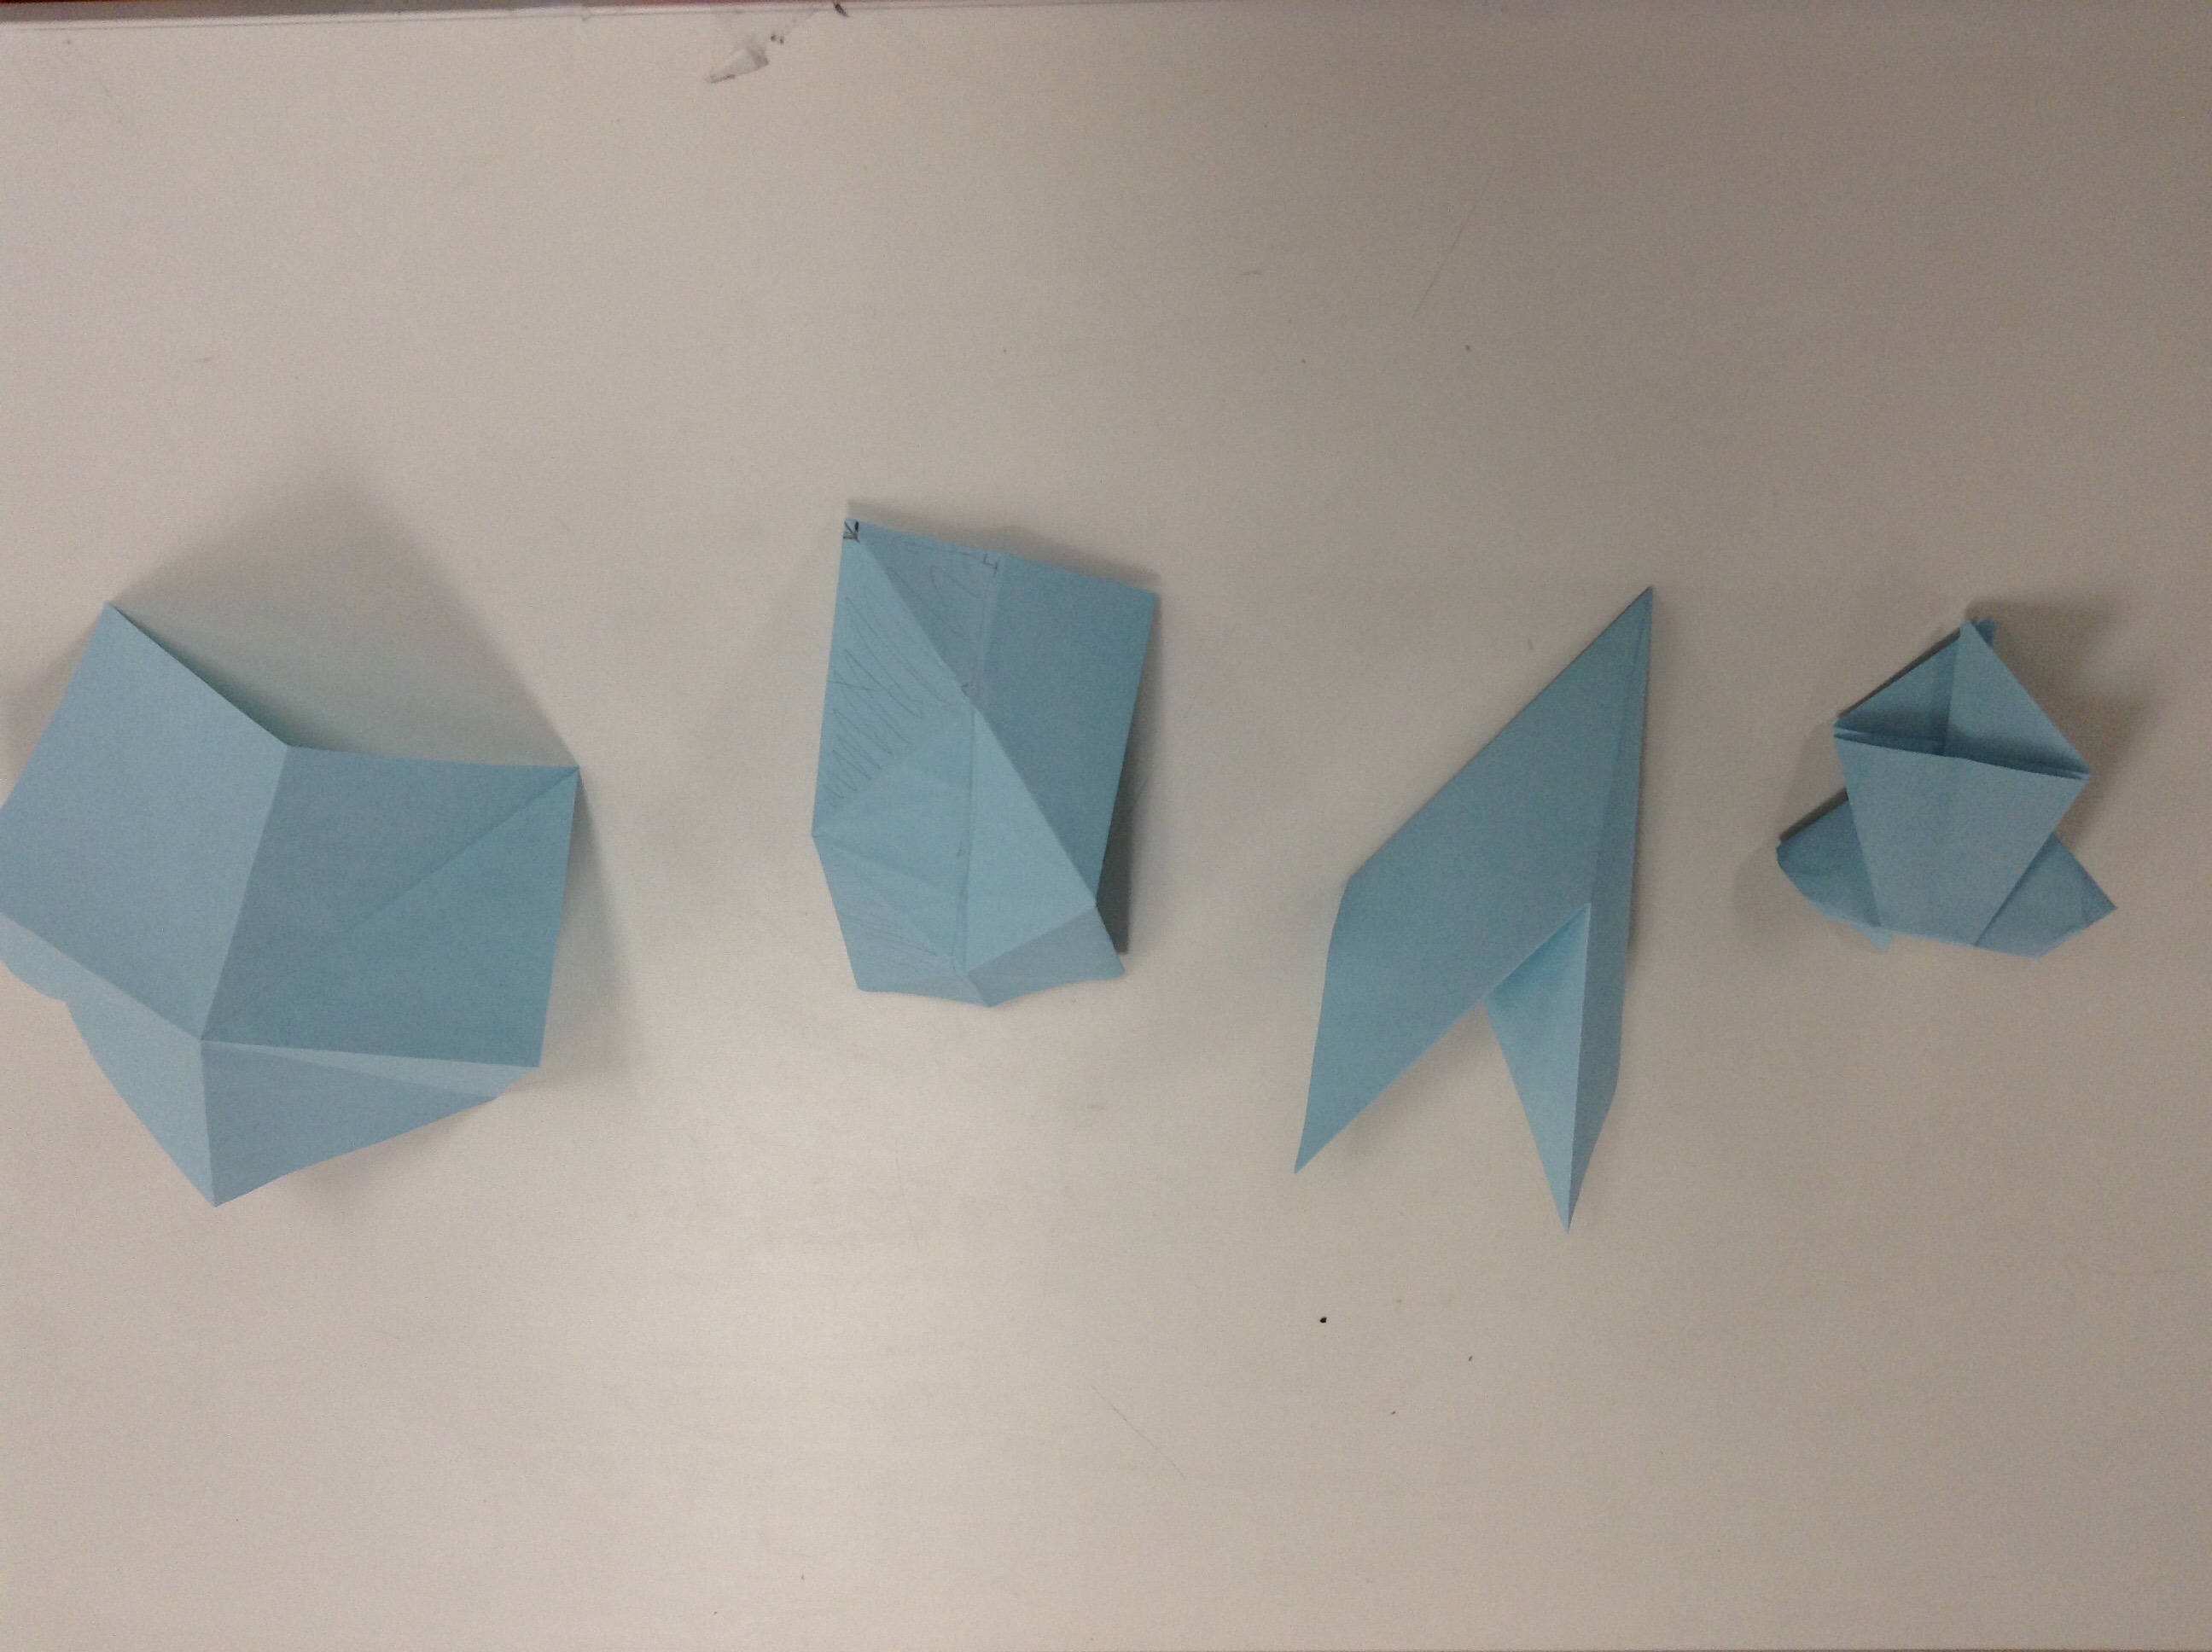 Origami Geometry Tufts Maker Network